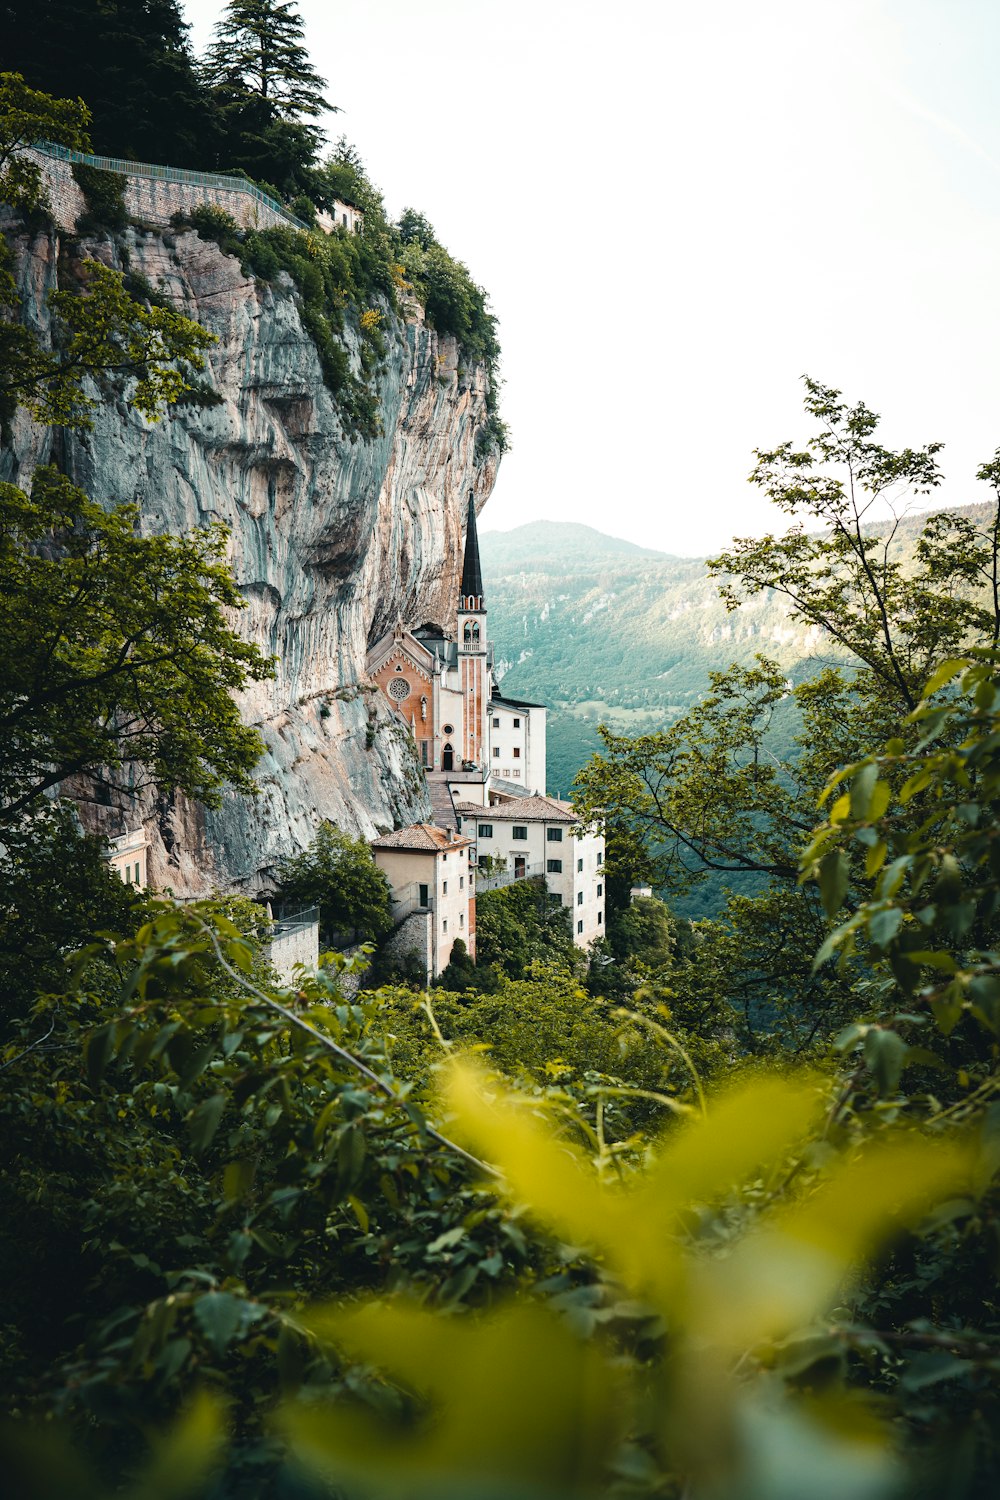 a castle perched on top of a cliff surrounded by trees